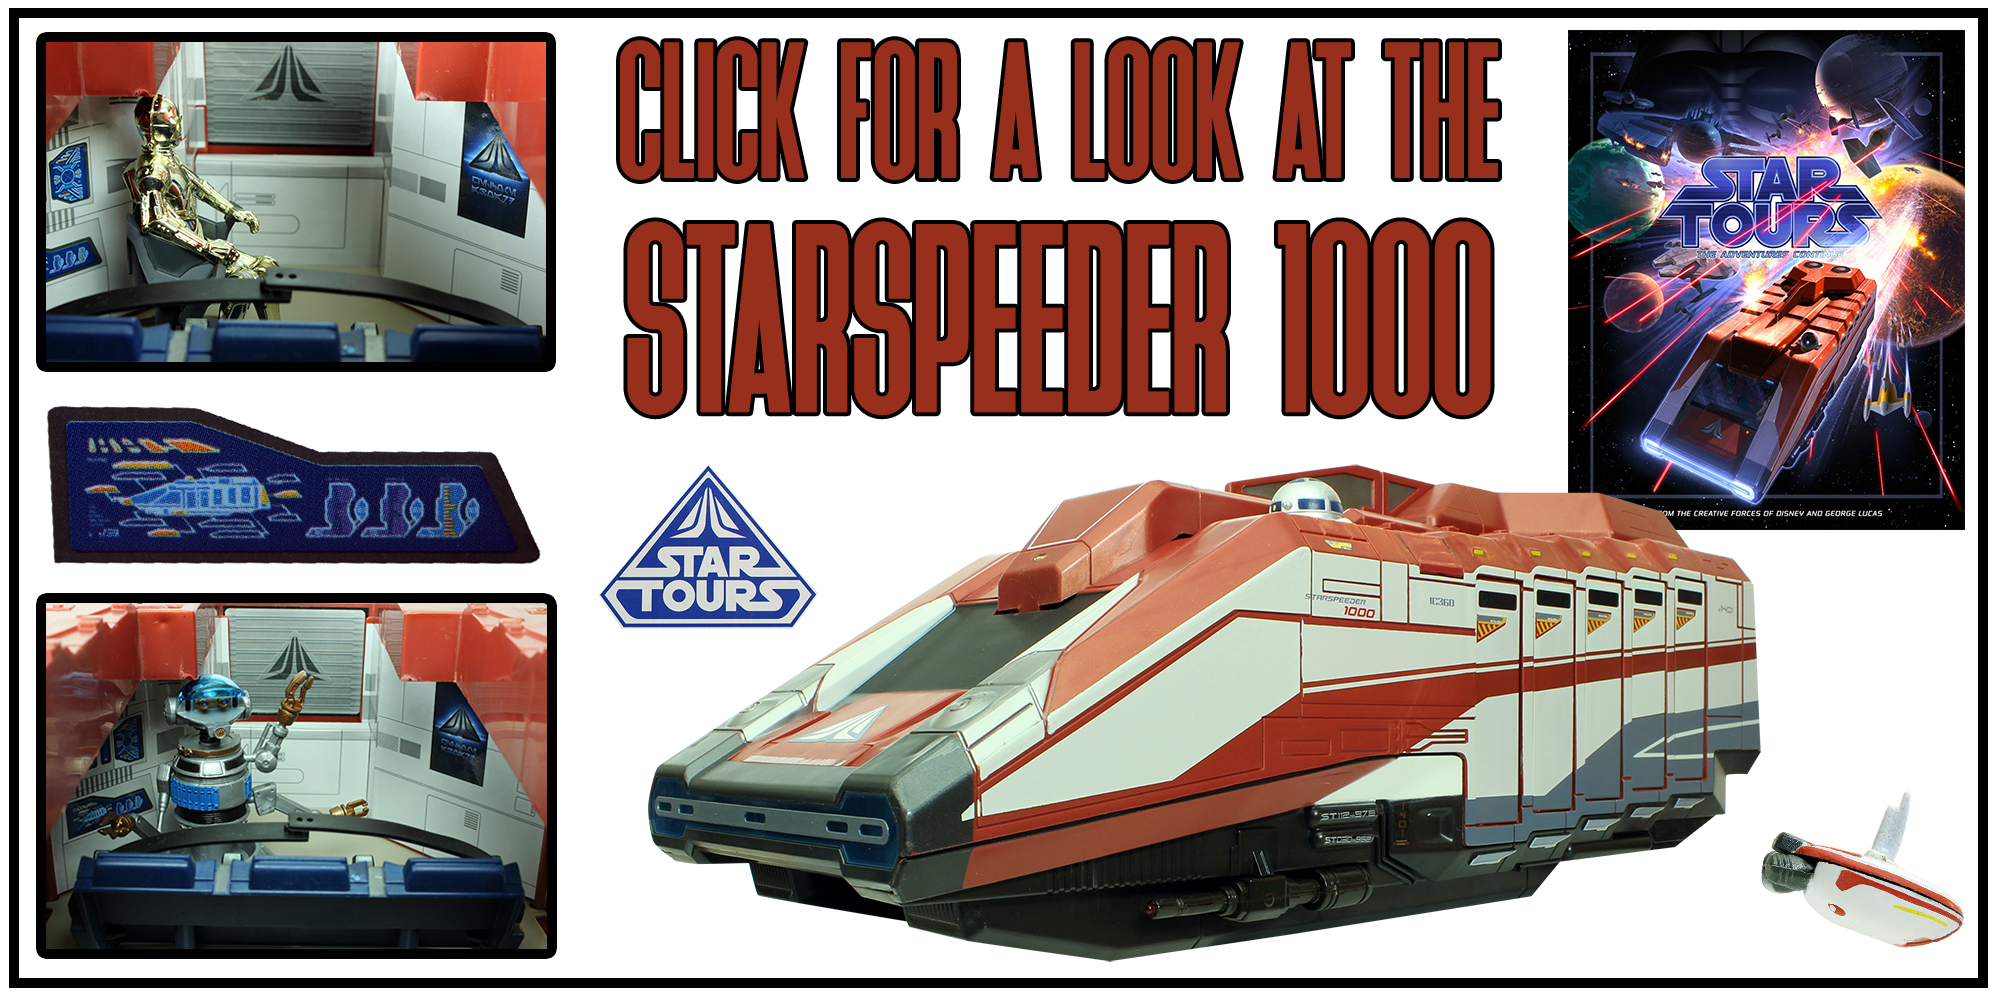 A Look At The STARSPEEDER 1000